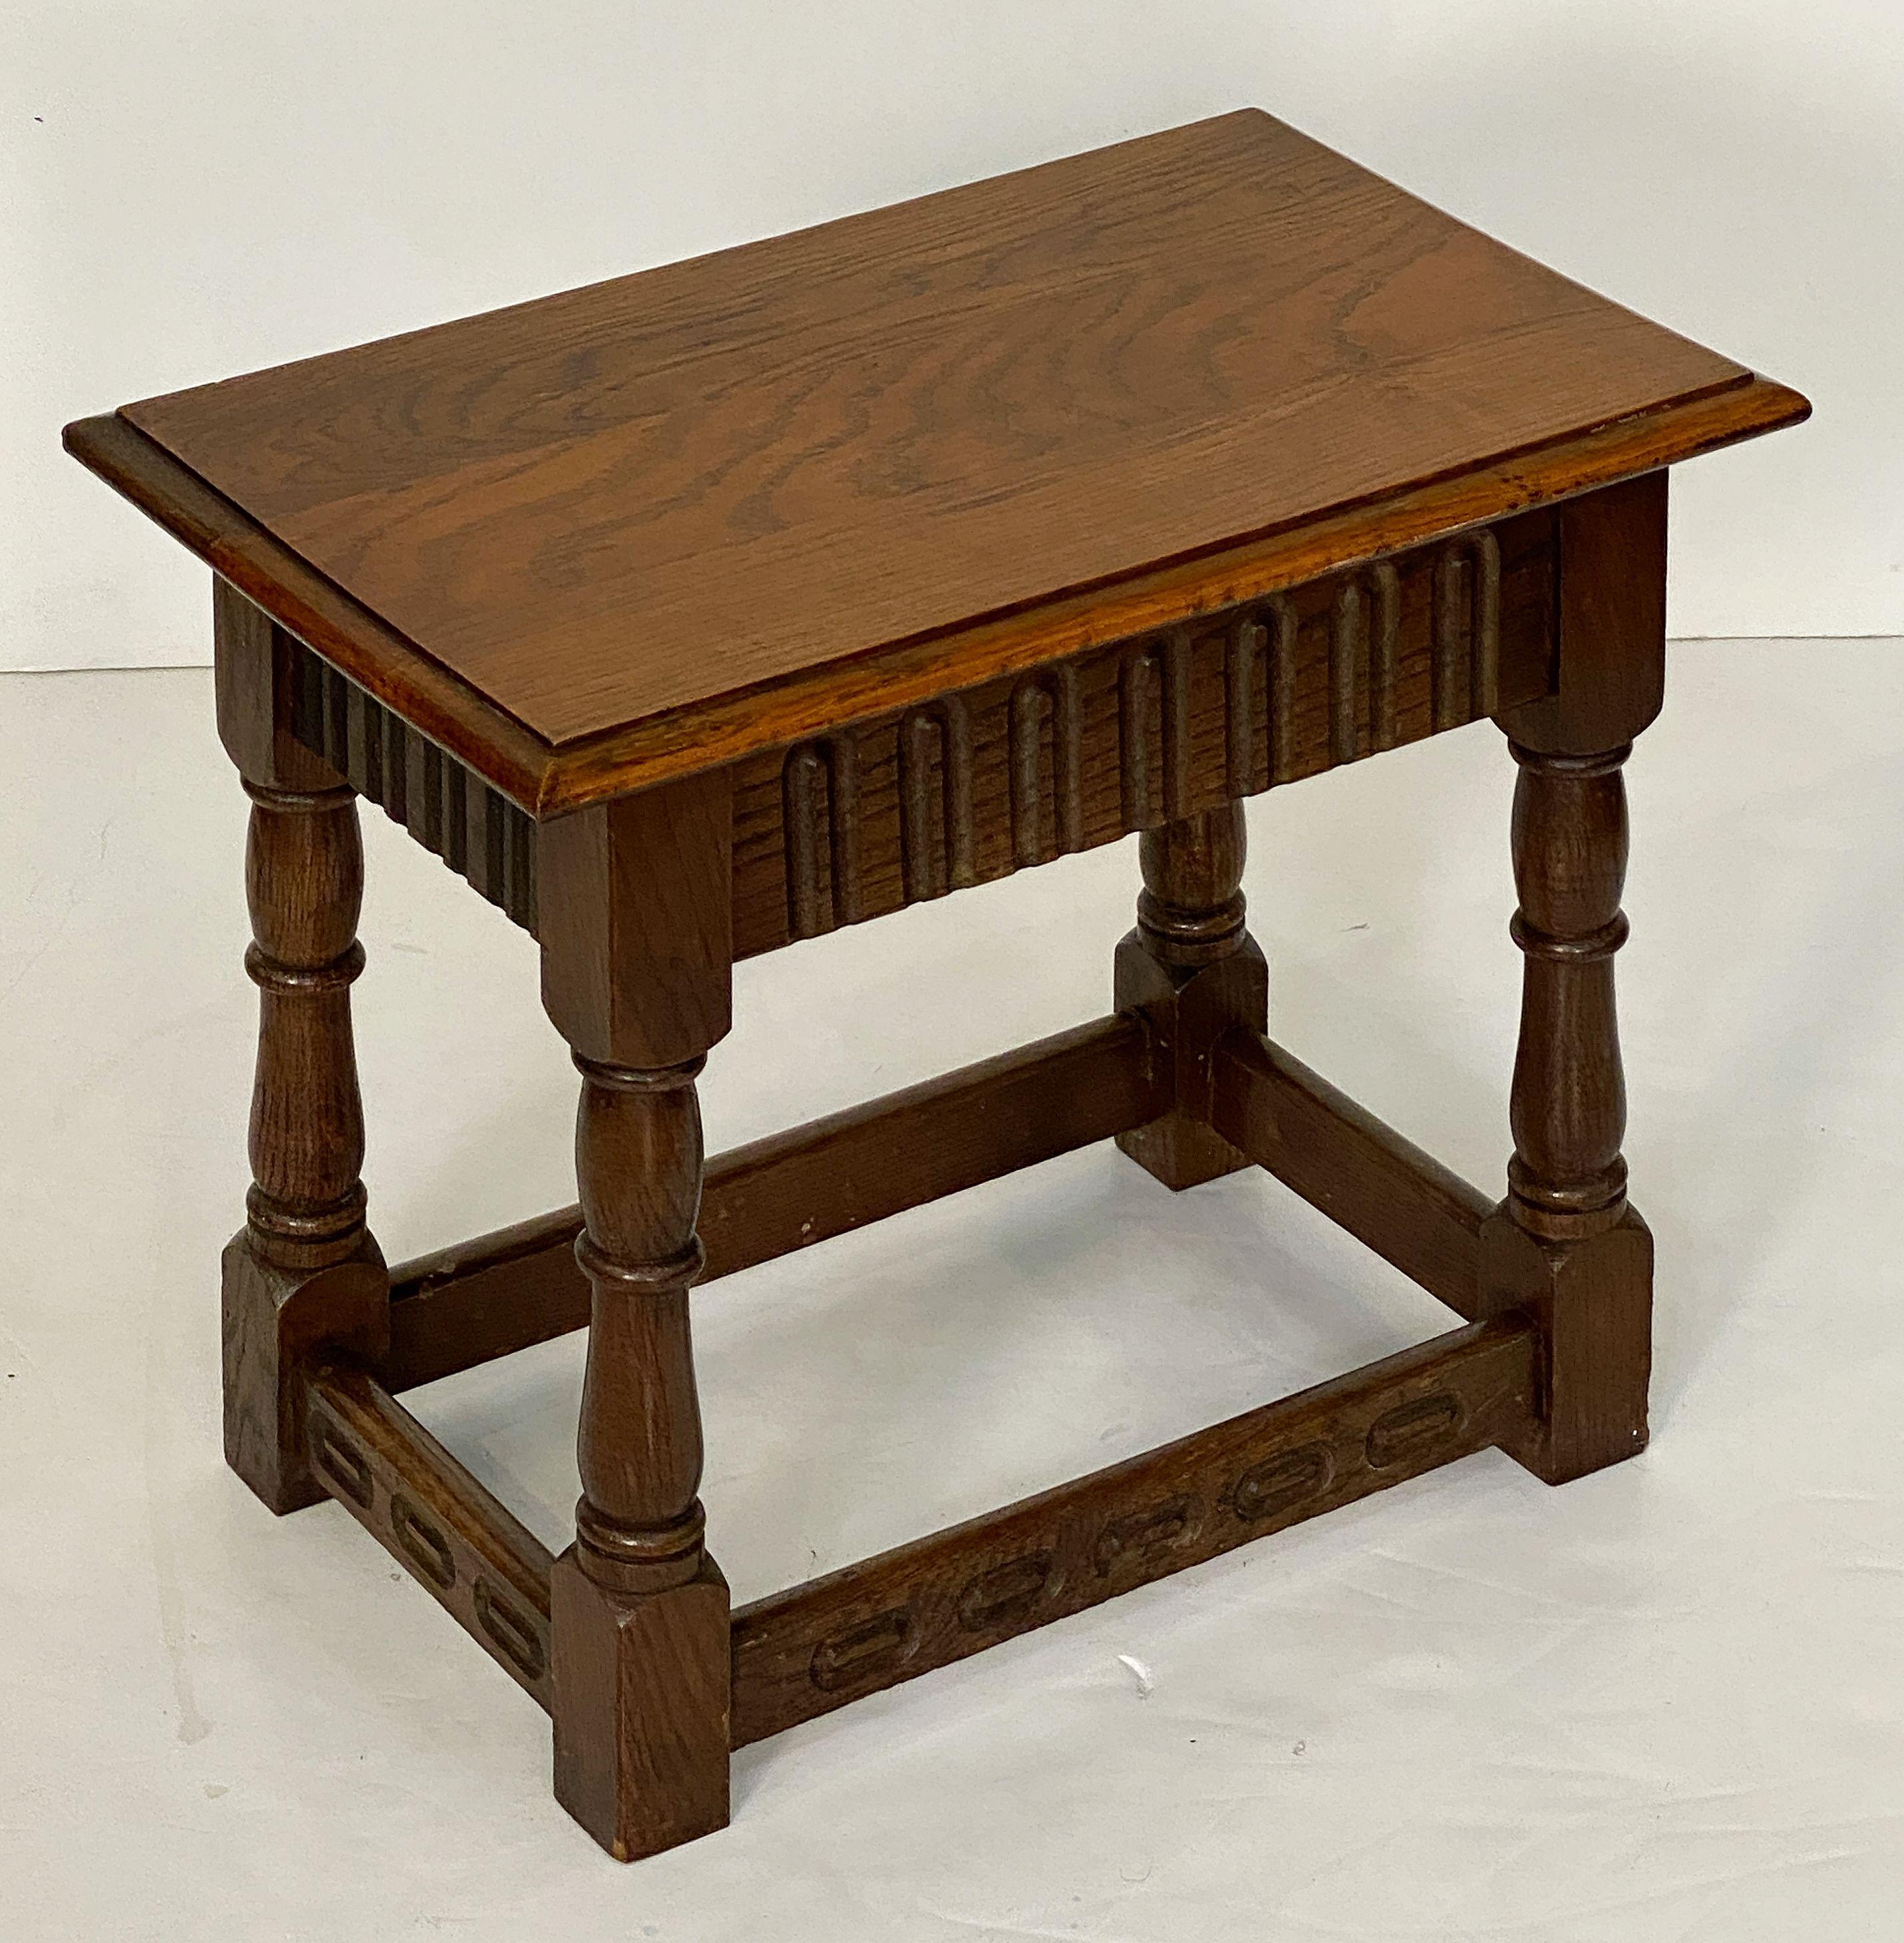 20th Century English Joint Stool of Oak with Rectangular Seat and Turned Legs